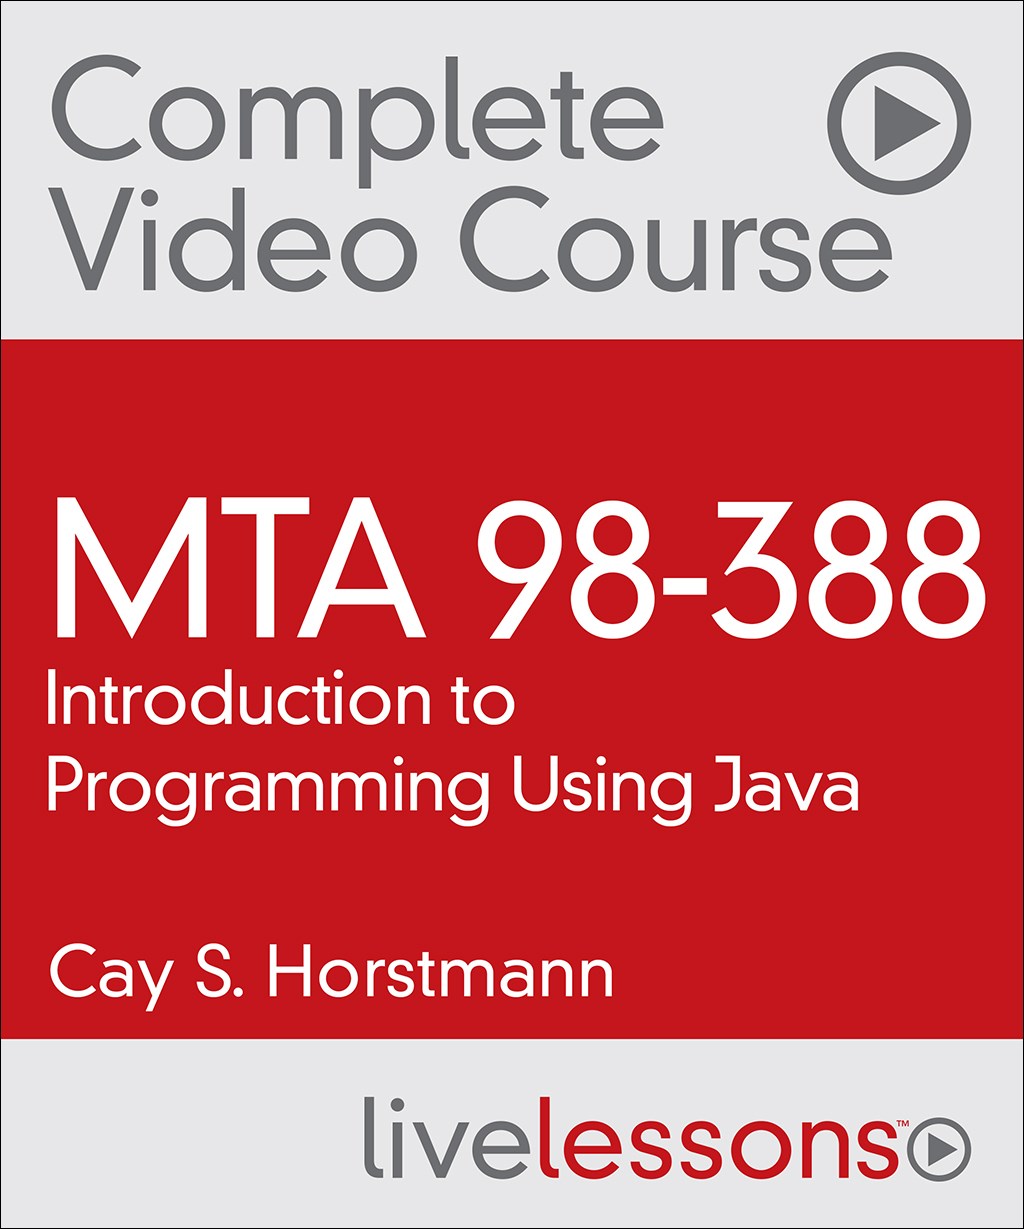 MTA Introduction to Programming Using Java (98-388) LiveLessons